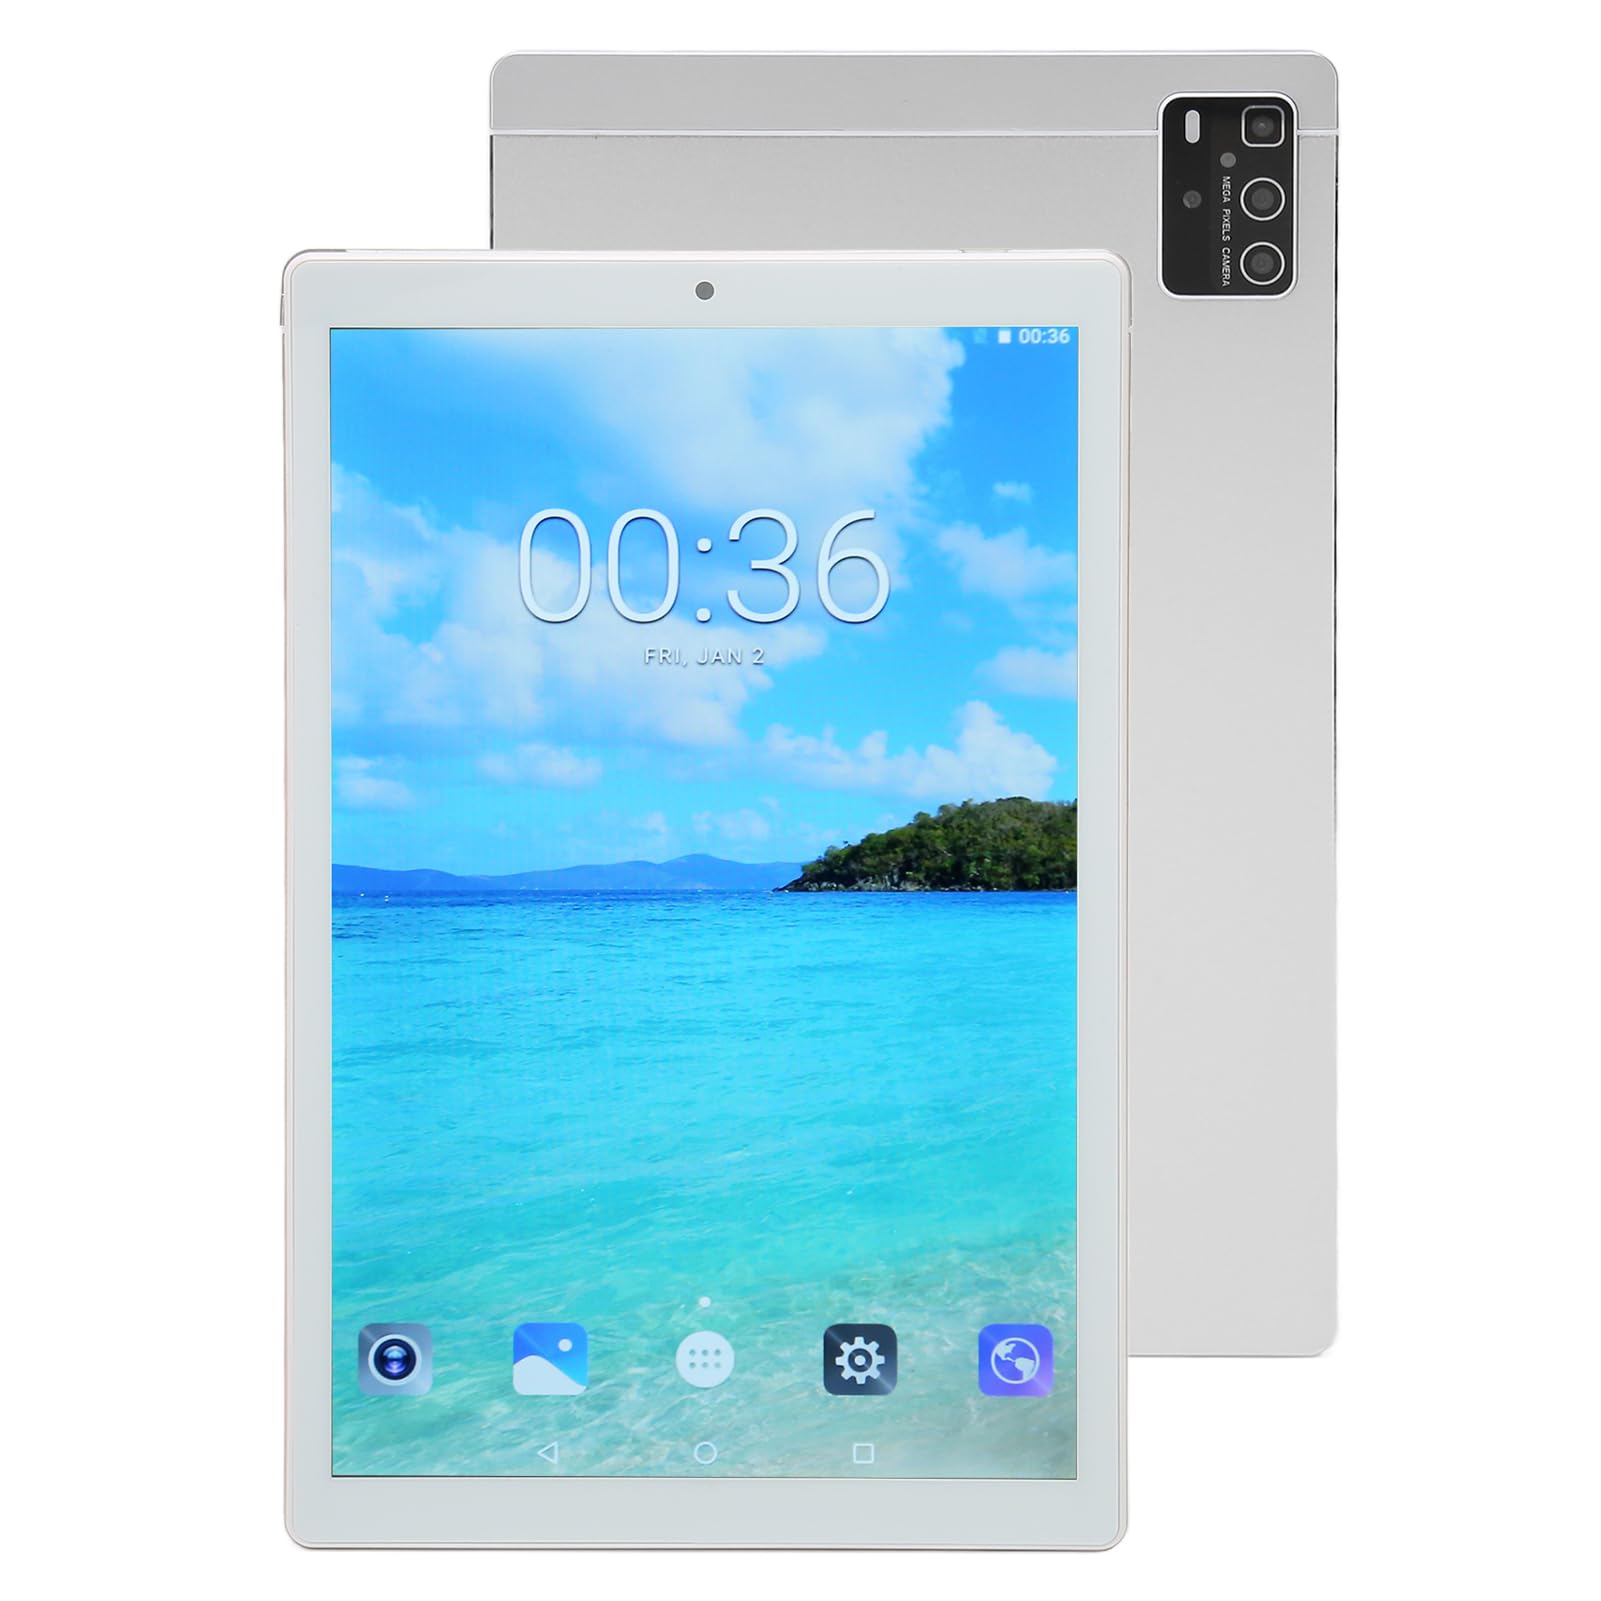 Tablet 10.1 Inch, Tablet for Android 10, FHD, FHD and HD Large Touch Screen, 6GB+128GB, Octa Core Processor, BT, 2.4G 5G Dual Band WiFi, Dual SIM Dual Standby (Silver)